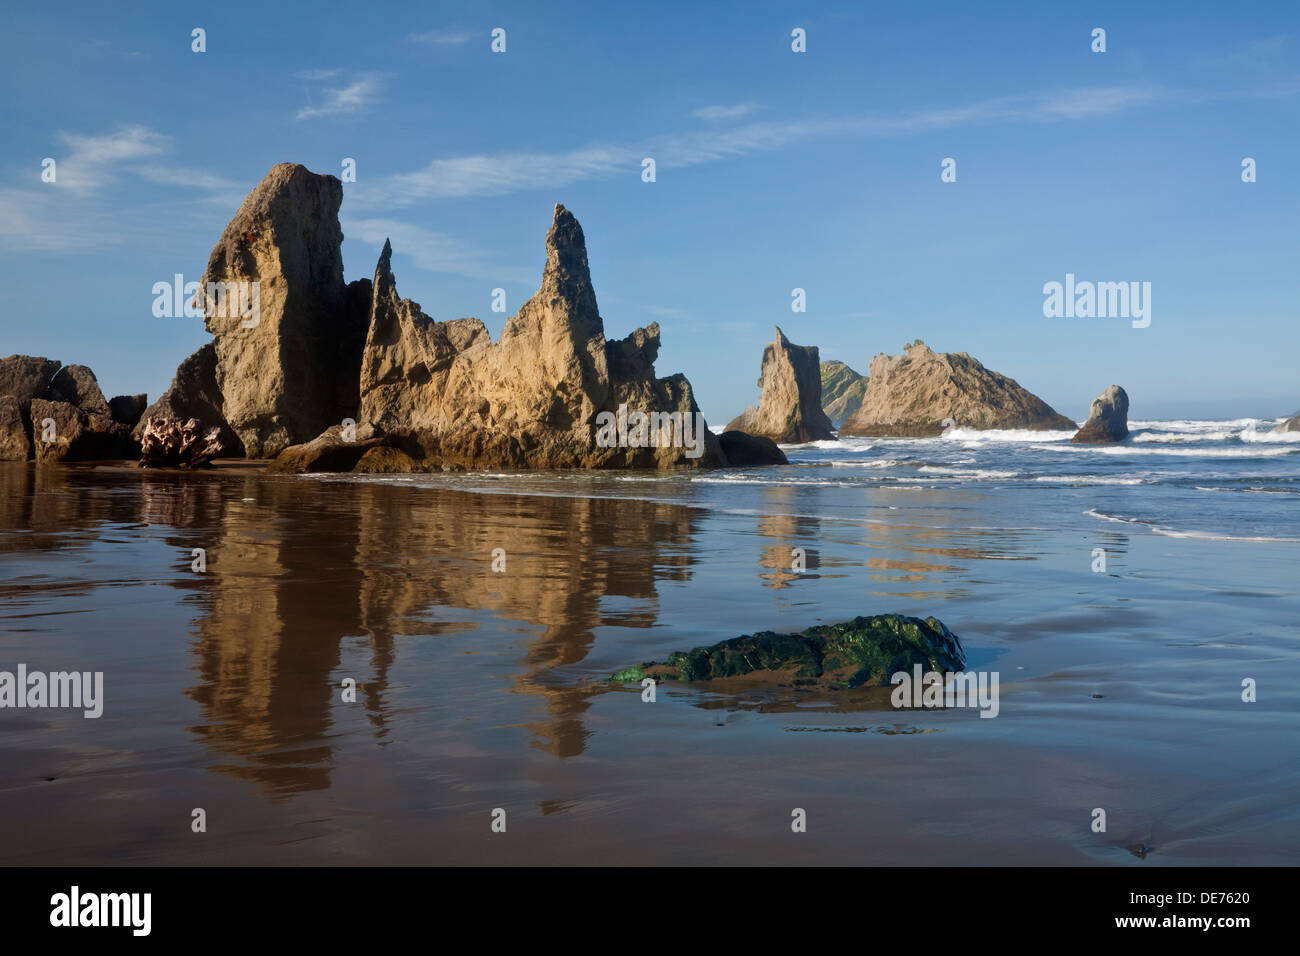 OR01143-00...OREGON - Seastacks and off shore islands from the Beach at Bandon. Stock Photo